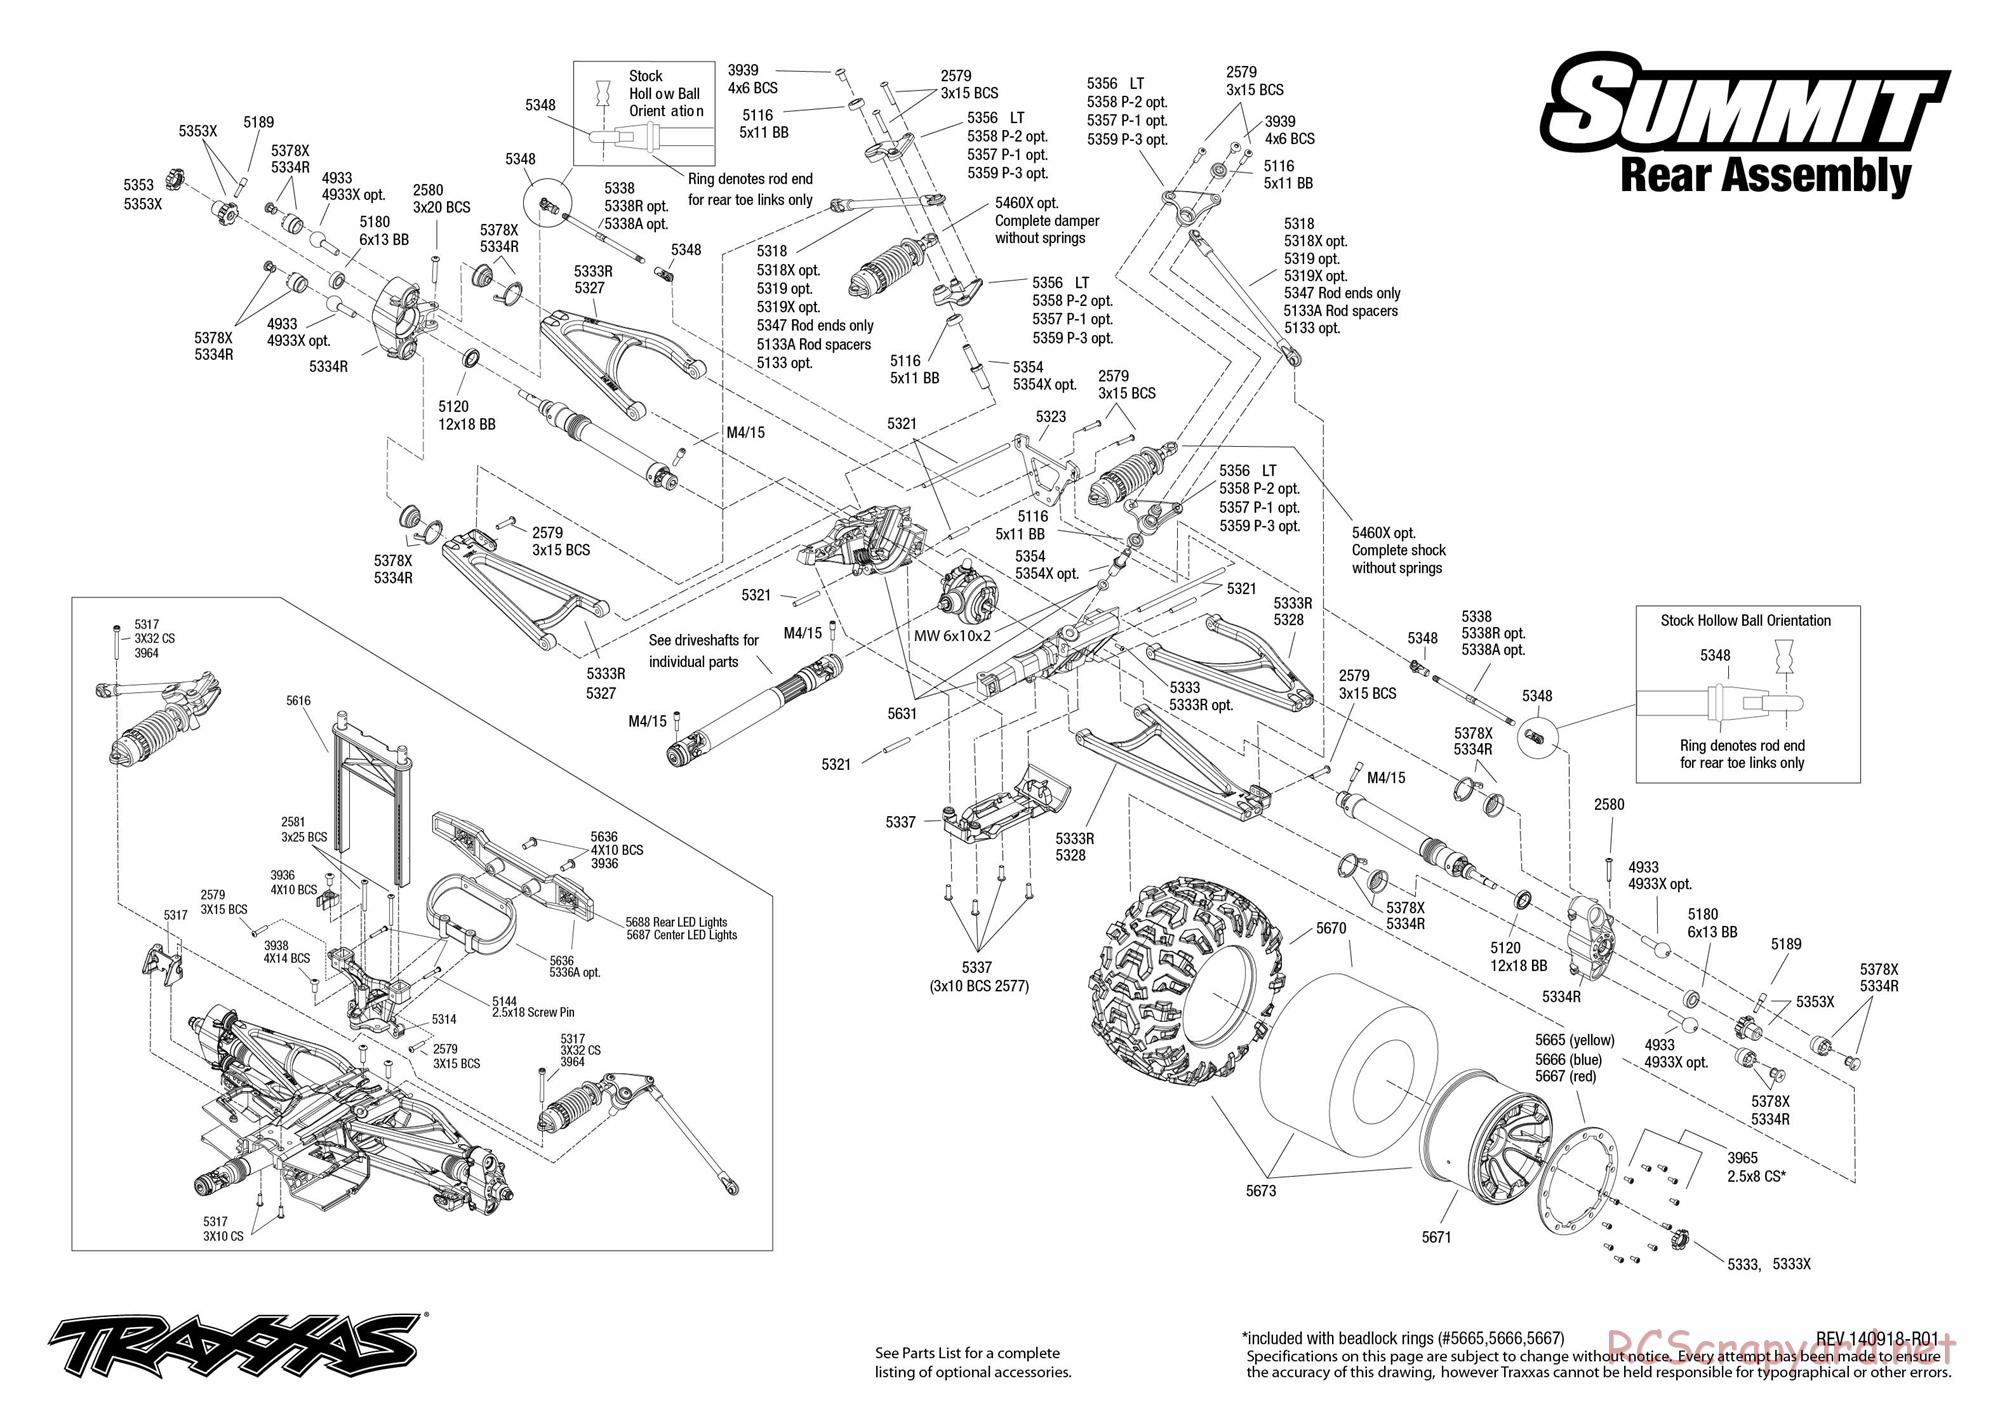 Traxxas - Summit (2014) - Exploded Views - Page 3